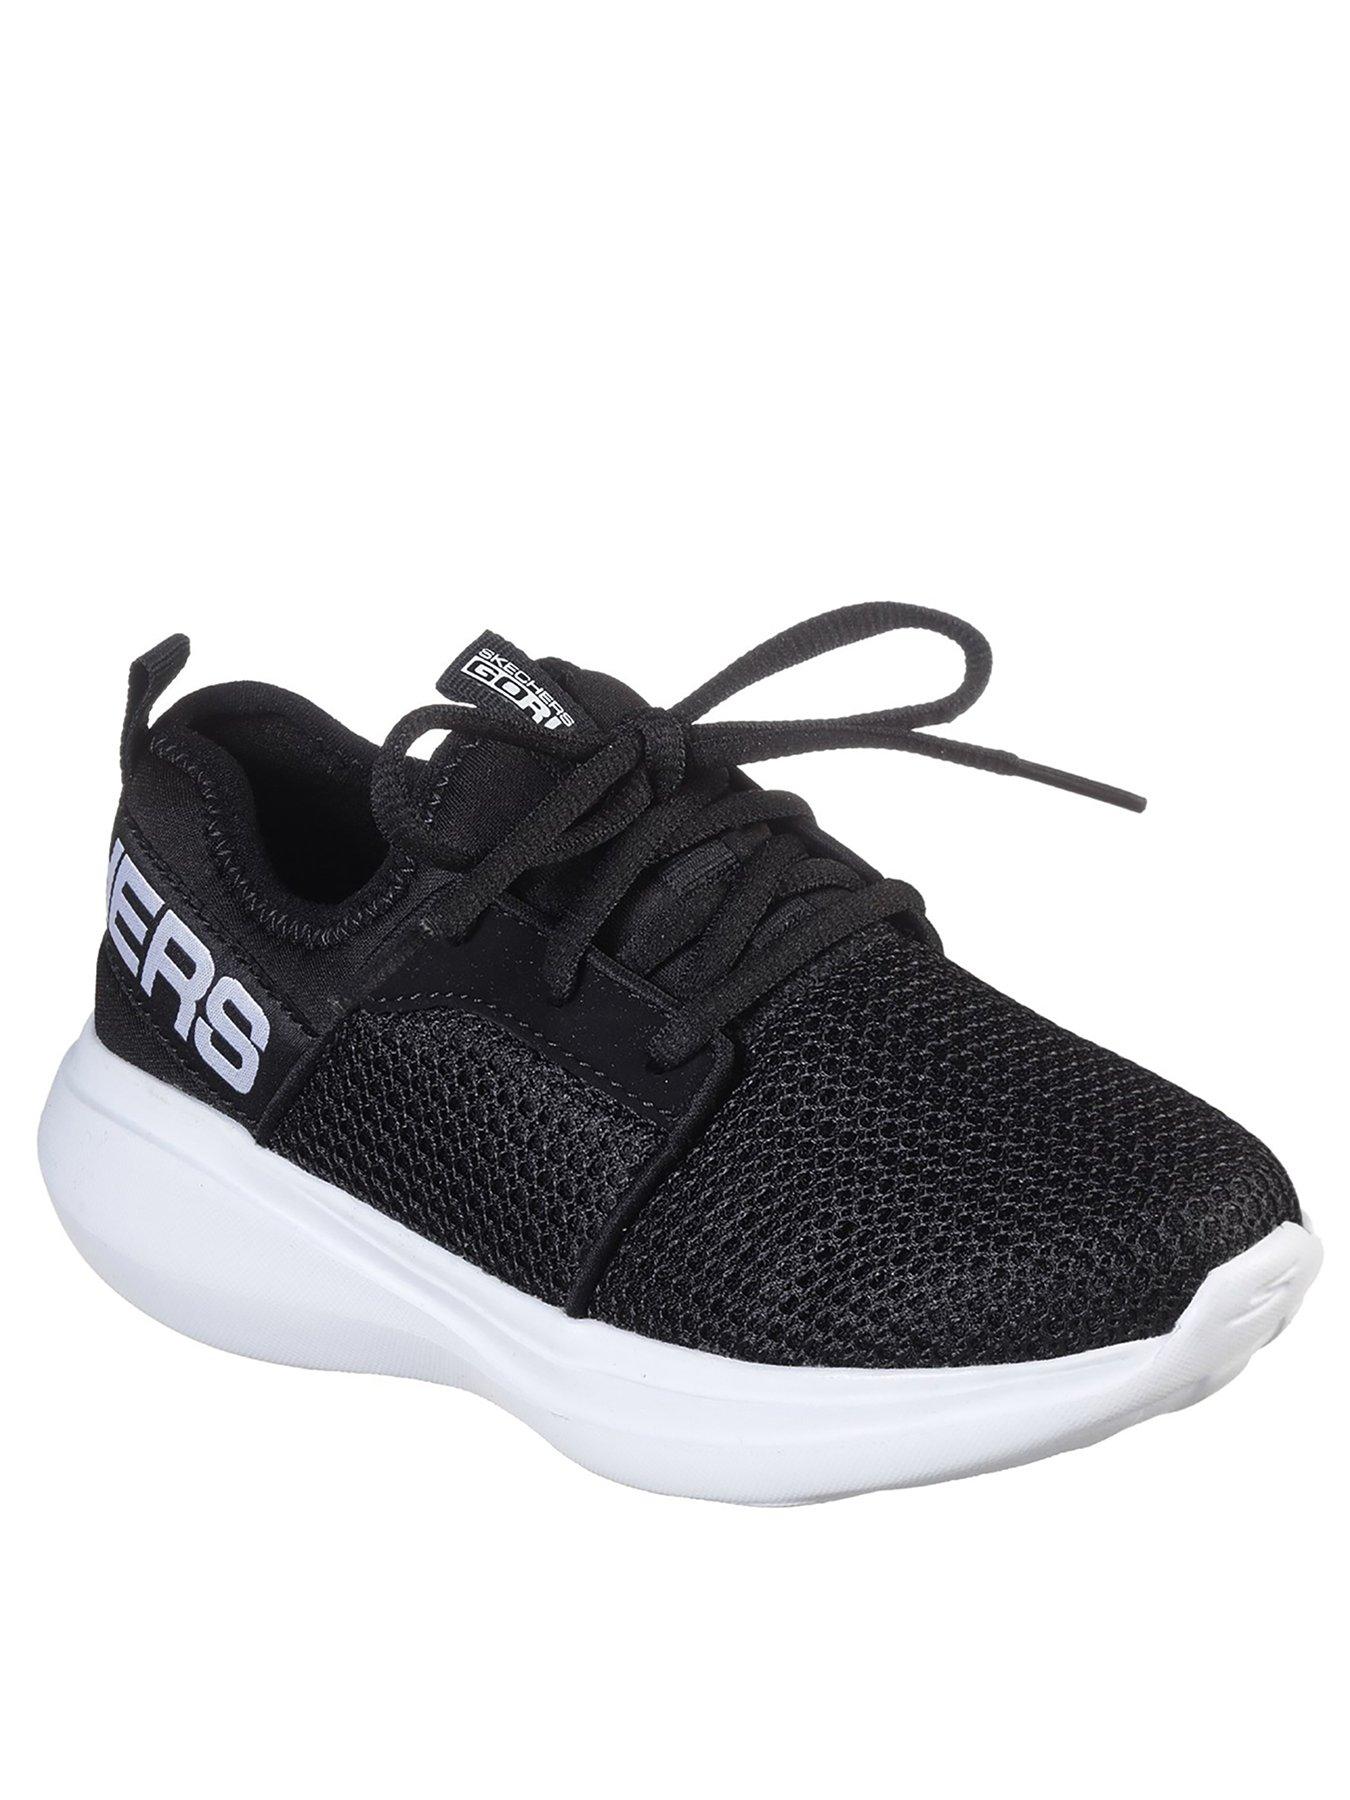 Kids Trainers | Branded Kids Trainers